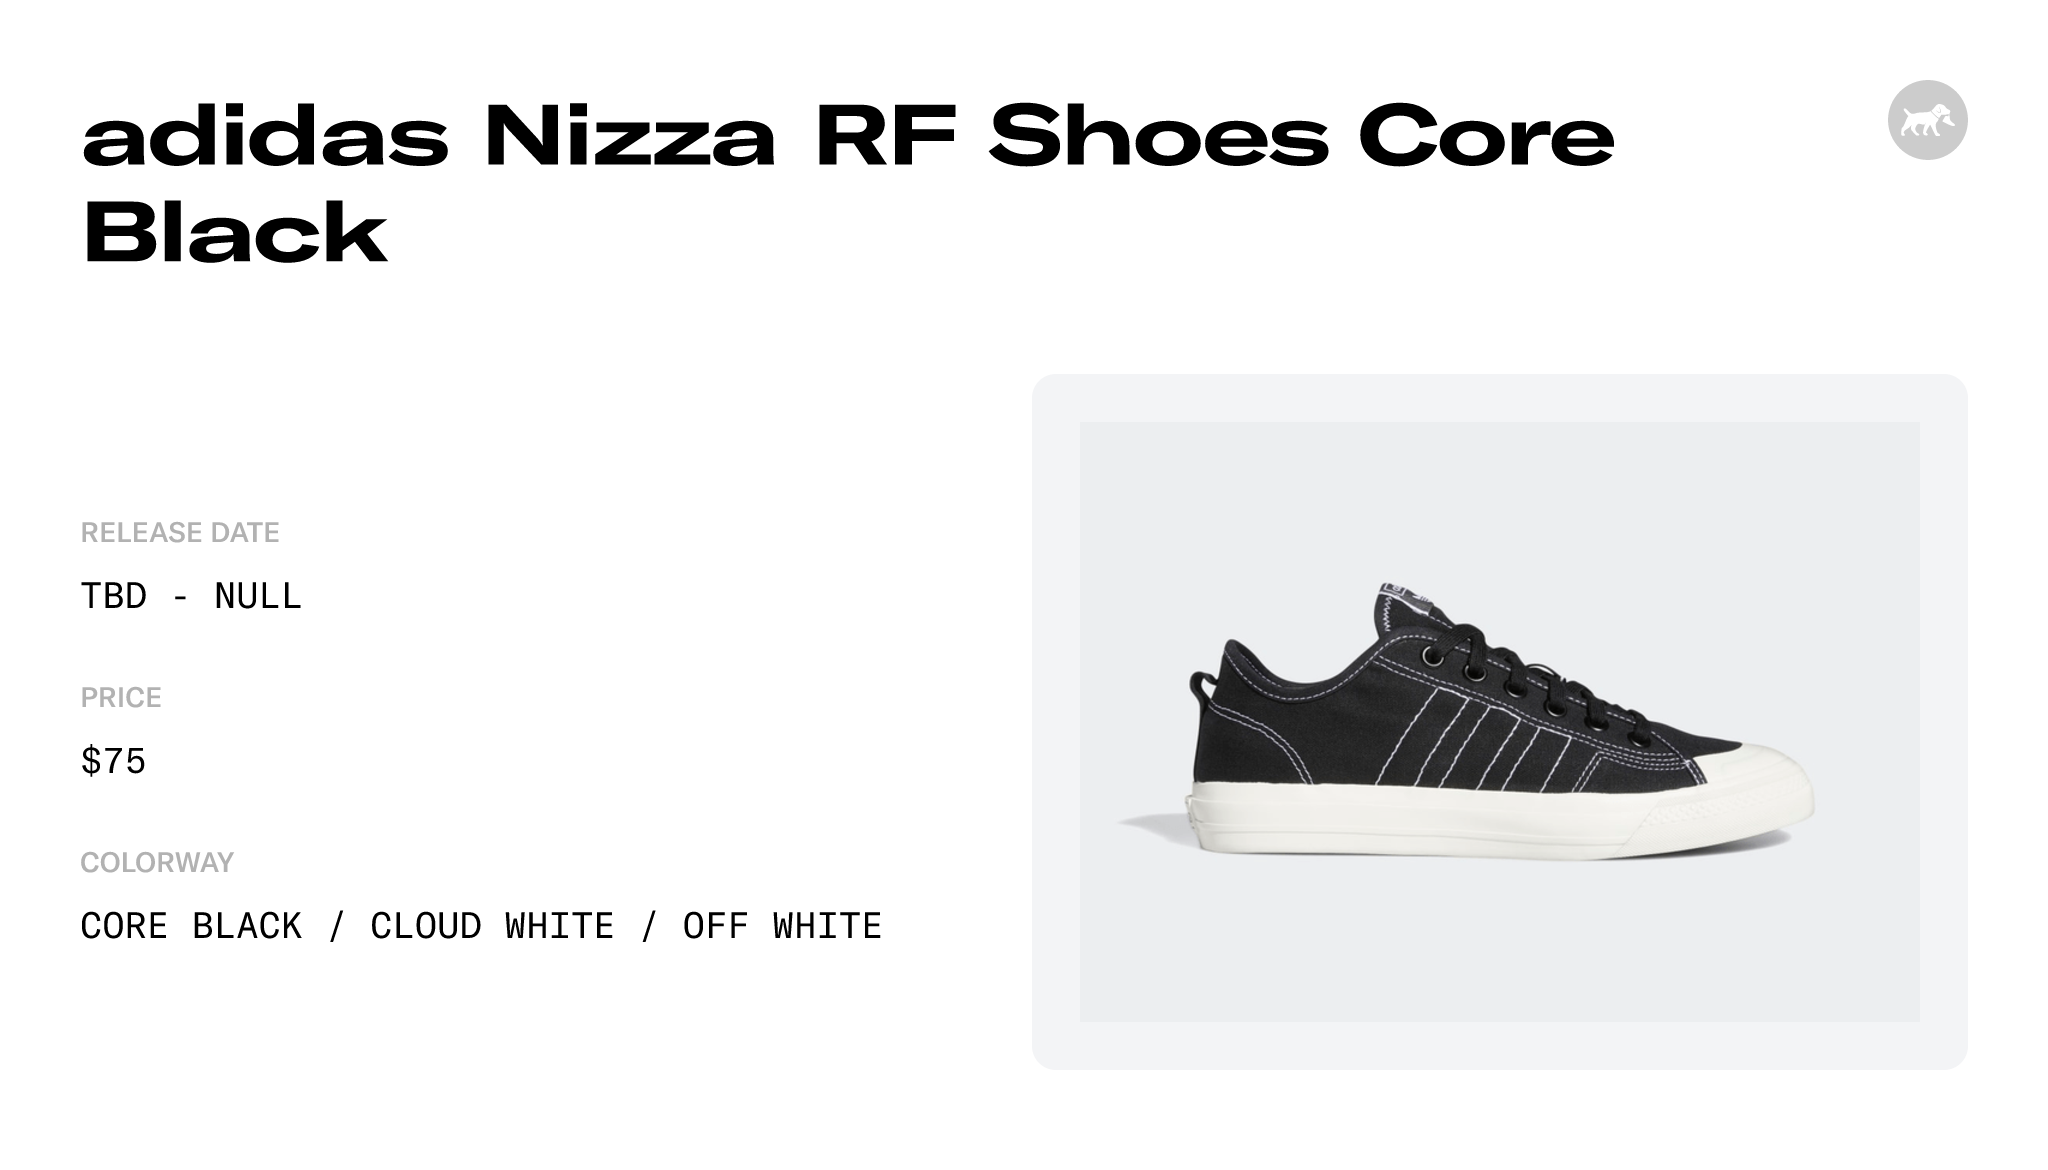 adidas Black Date - Nizza Raffles Release RF and EE5599 Core Shoes